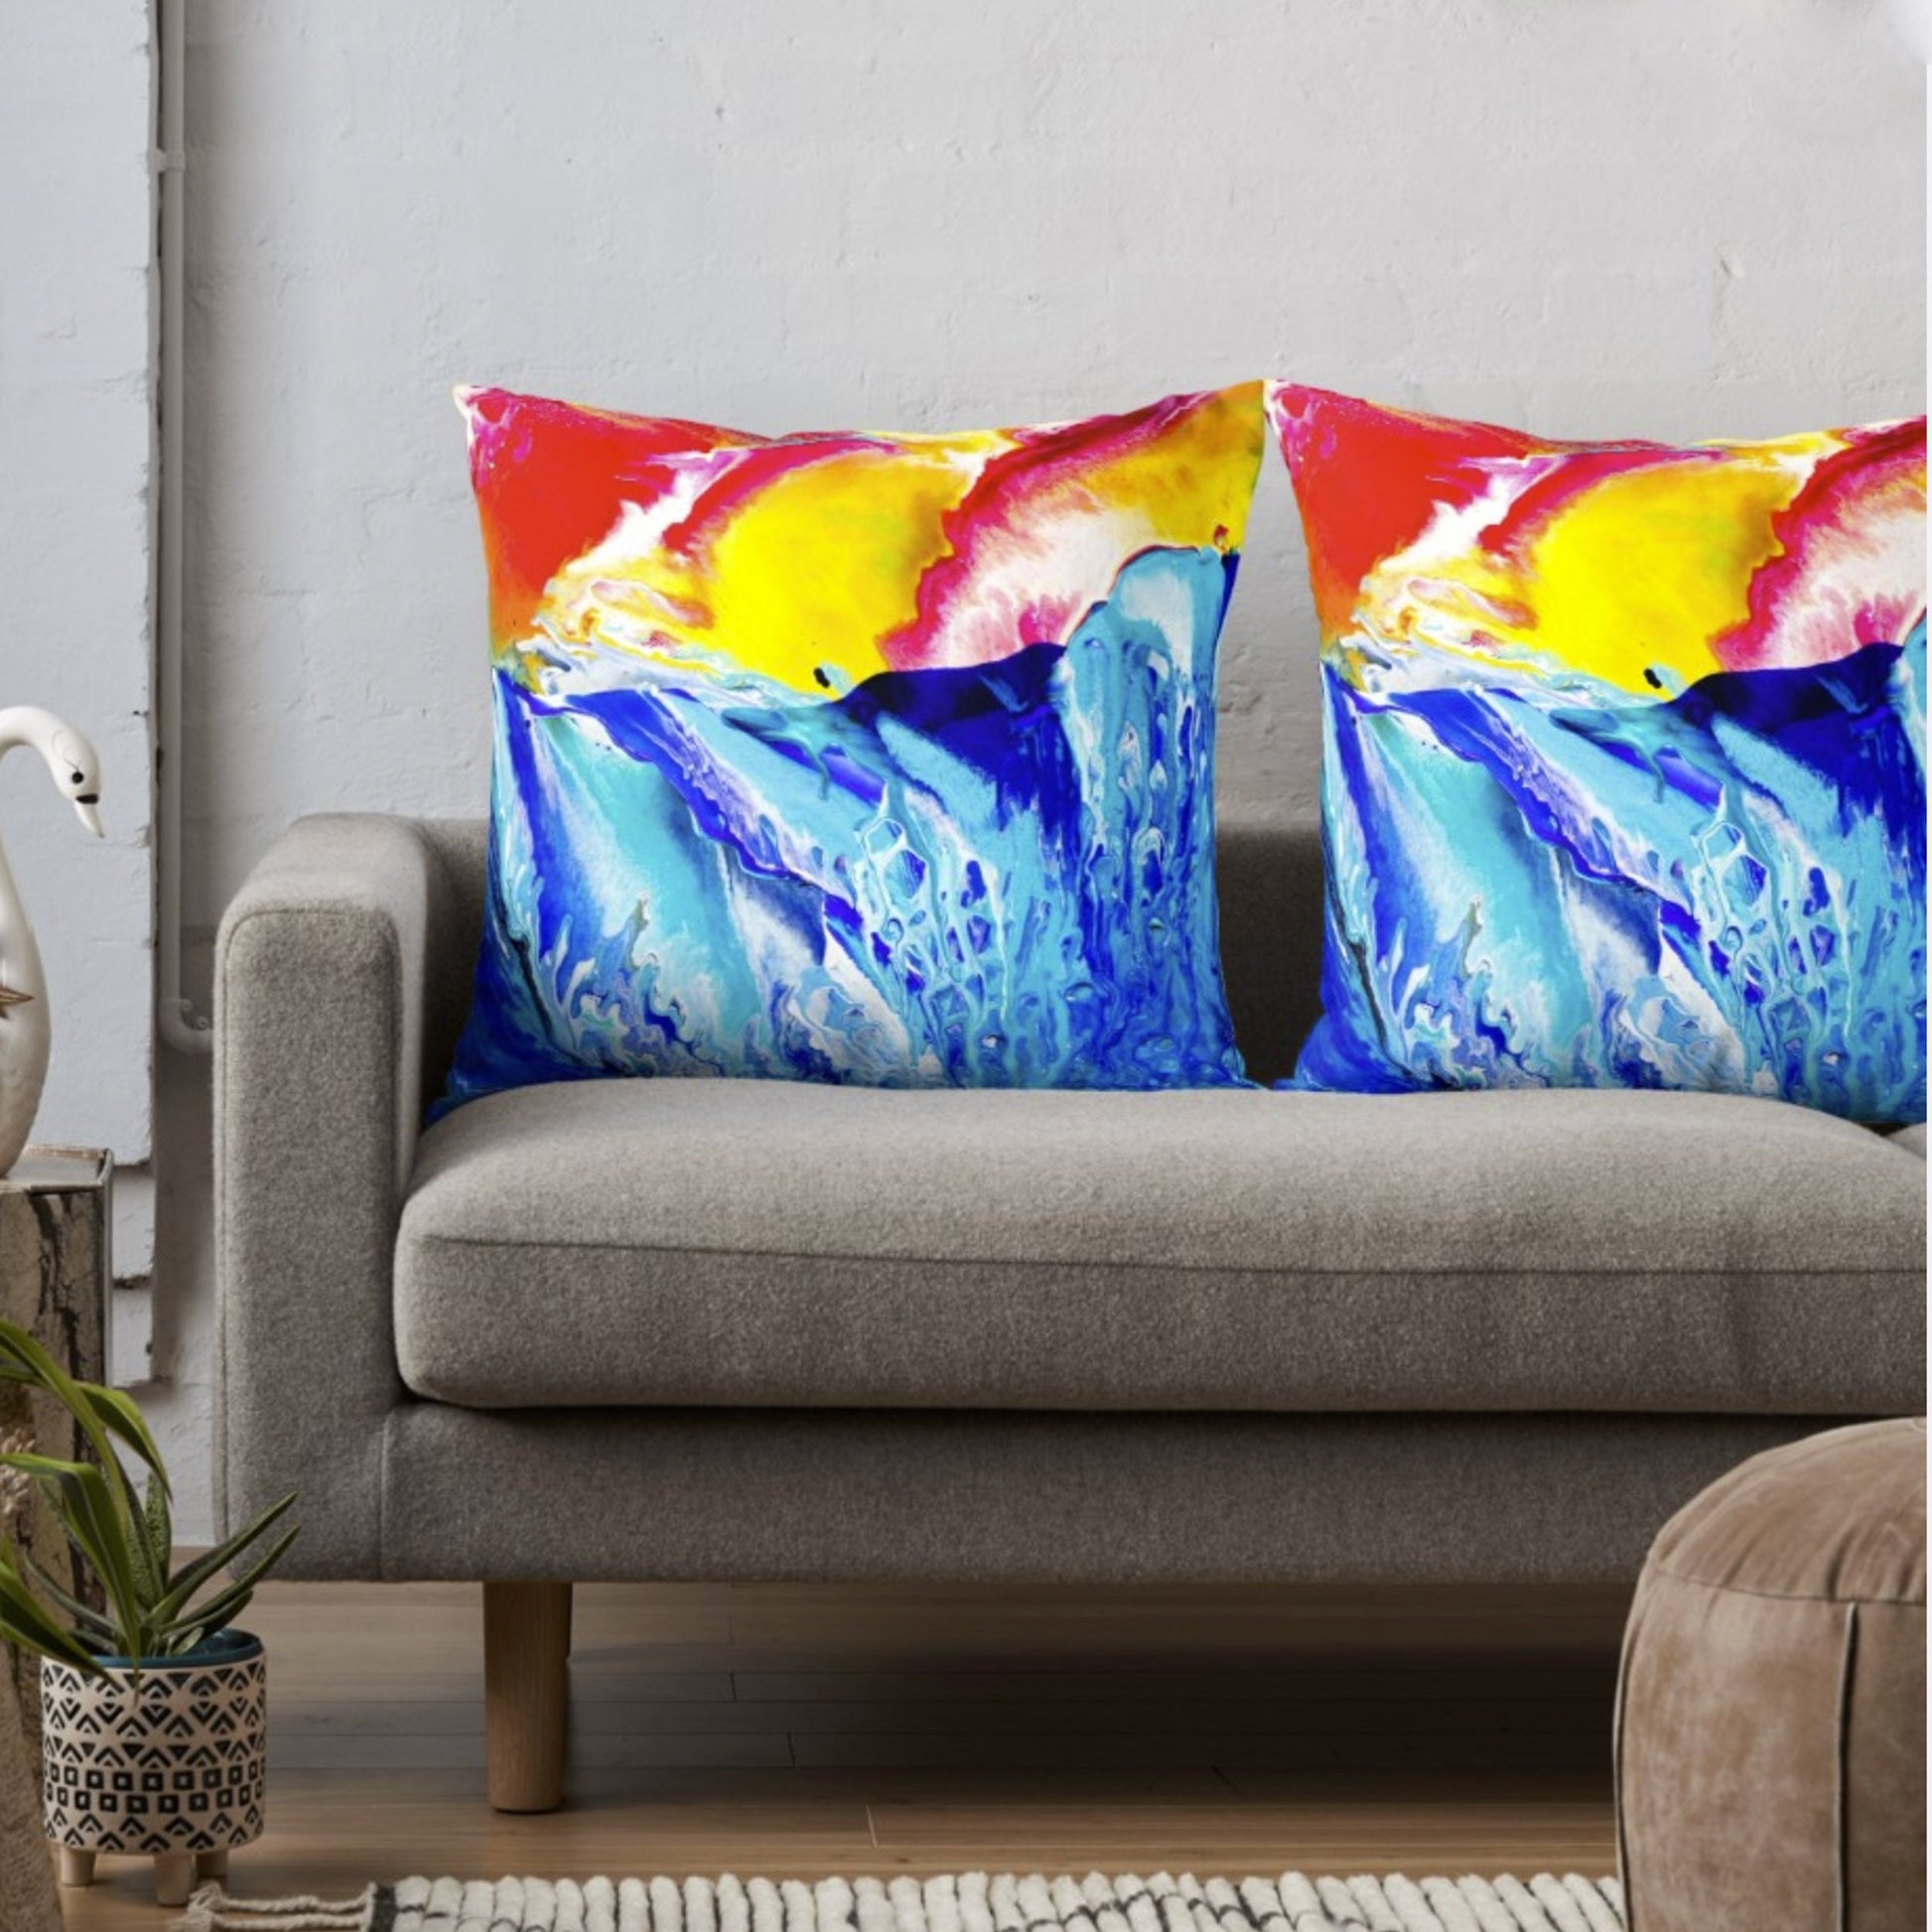 Ocean Pillow Unique Gifts Abstract Art Pillows For Couch Blue Pillows Beachy Pillow Colorful Pillows Art Pillow Ocean Pillows artsy pillow